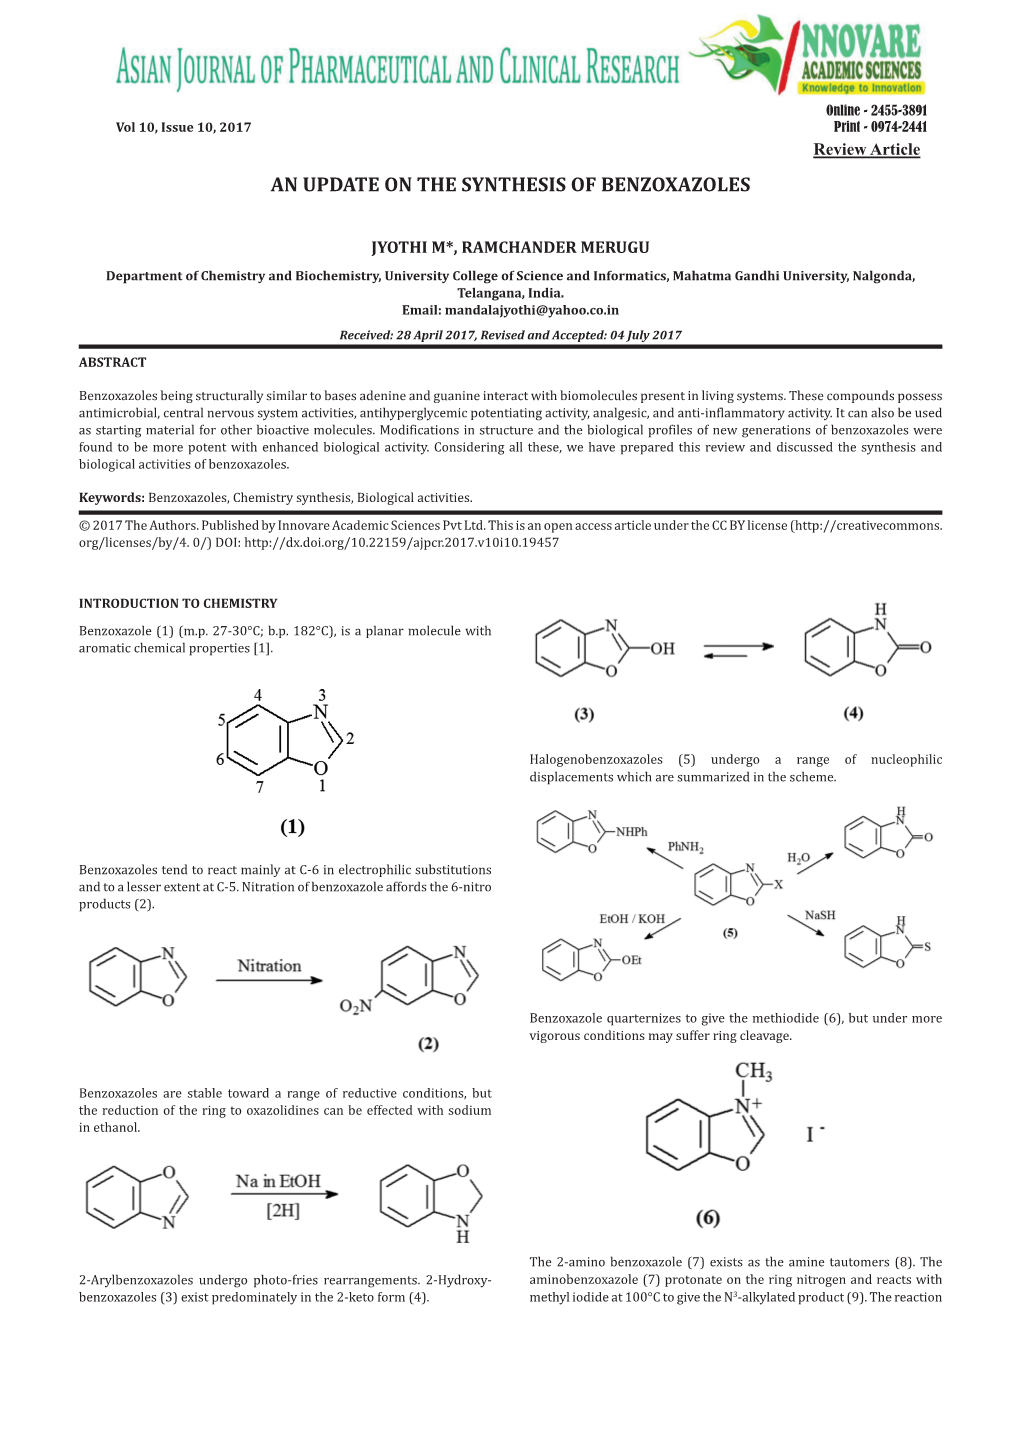 An Update on the Synthesis of Benzoxazoles